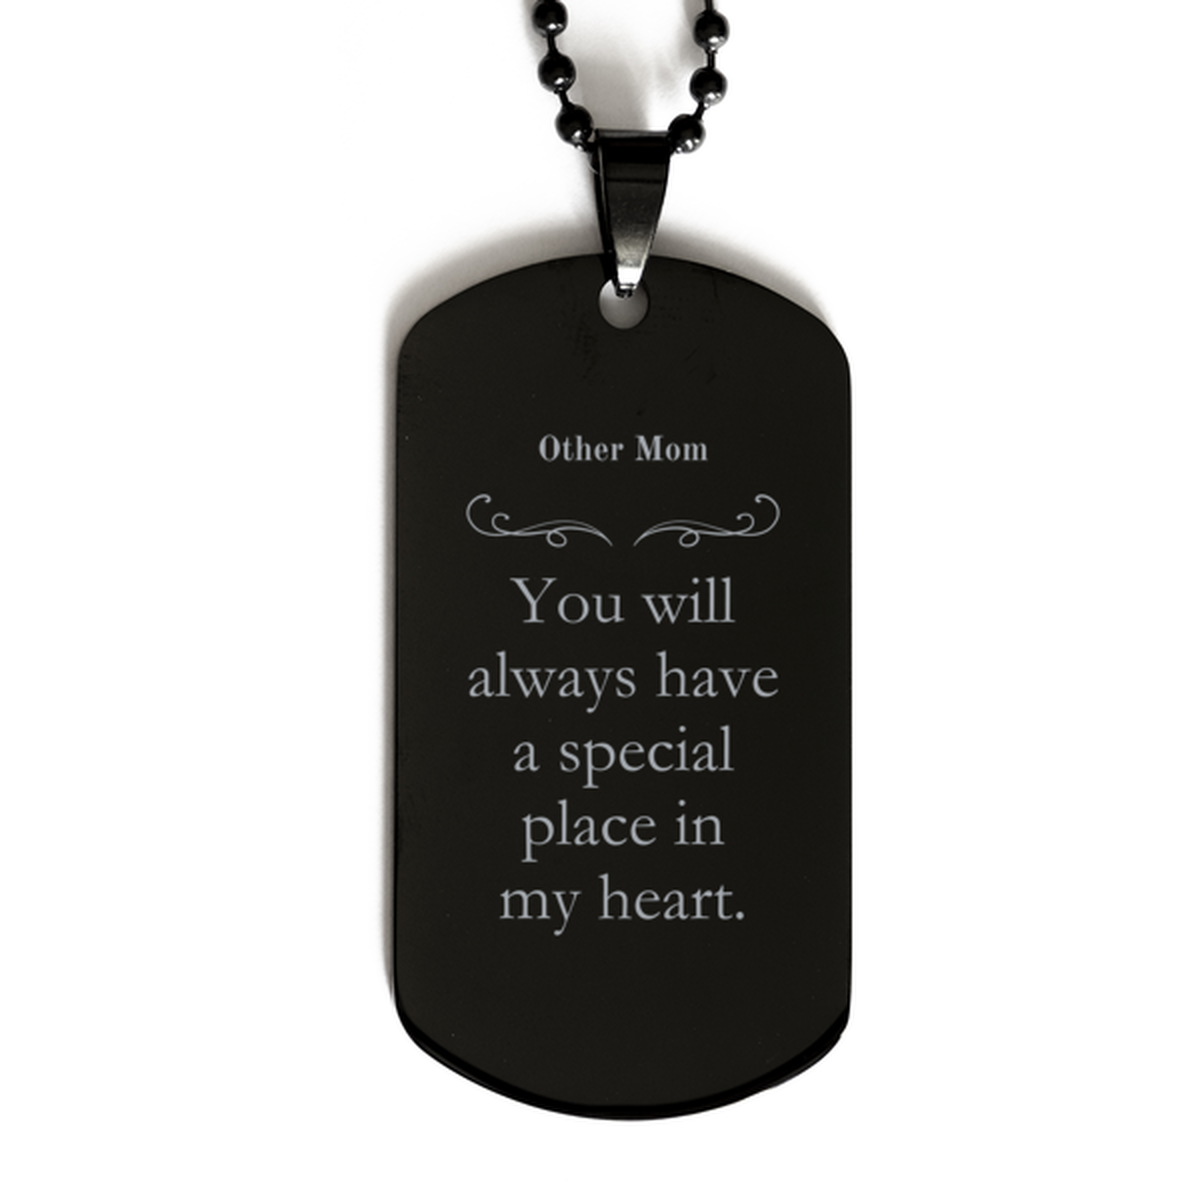 Other Mom Engraved Black Dog Tag for Birthday or Christmas Gift - You will always have a special place in my heart, perfect for any occasion